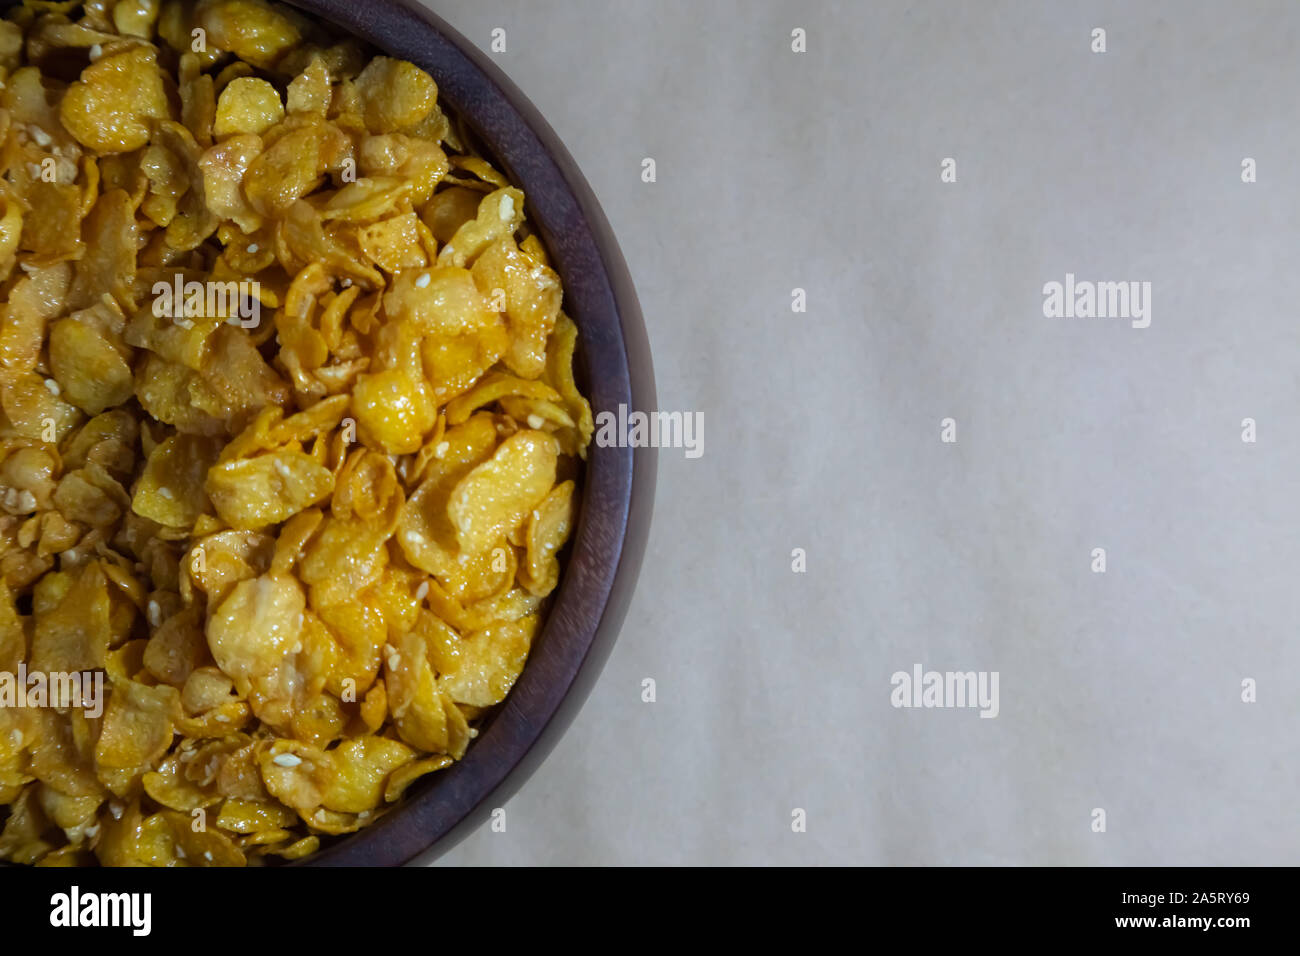 Close up Honey coated puffed wheat breakfast cereal on gray baclground. Stock Photo